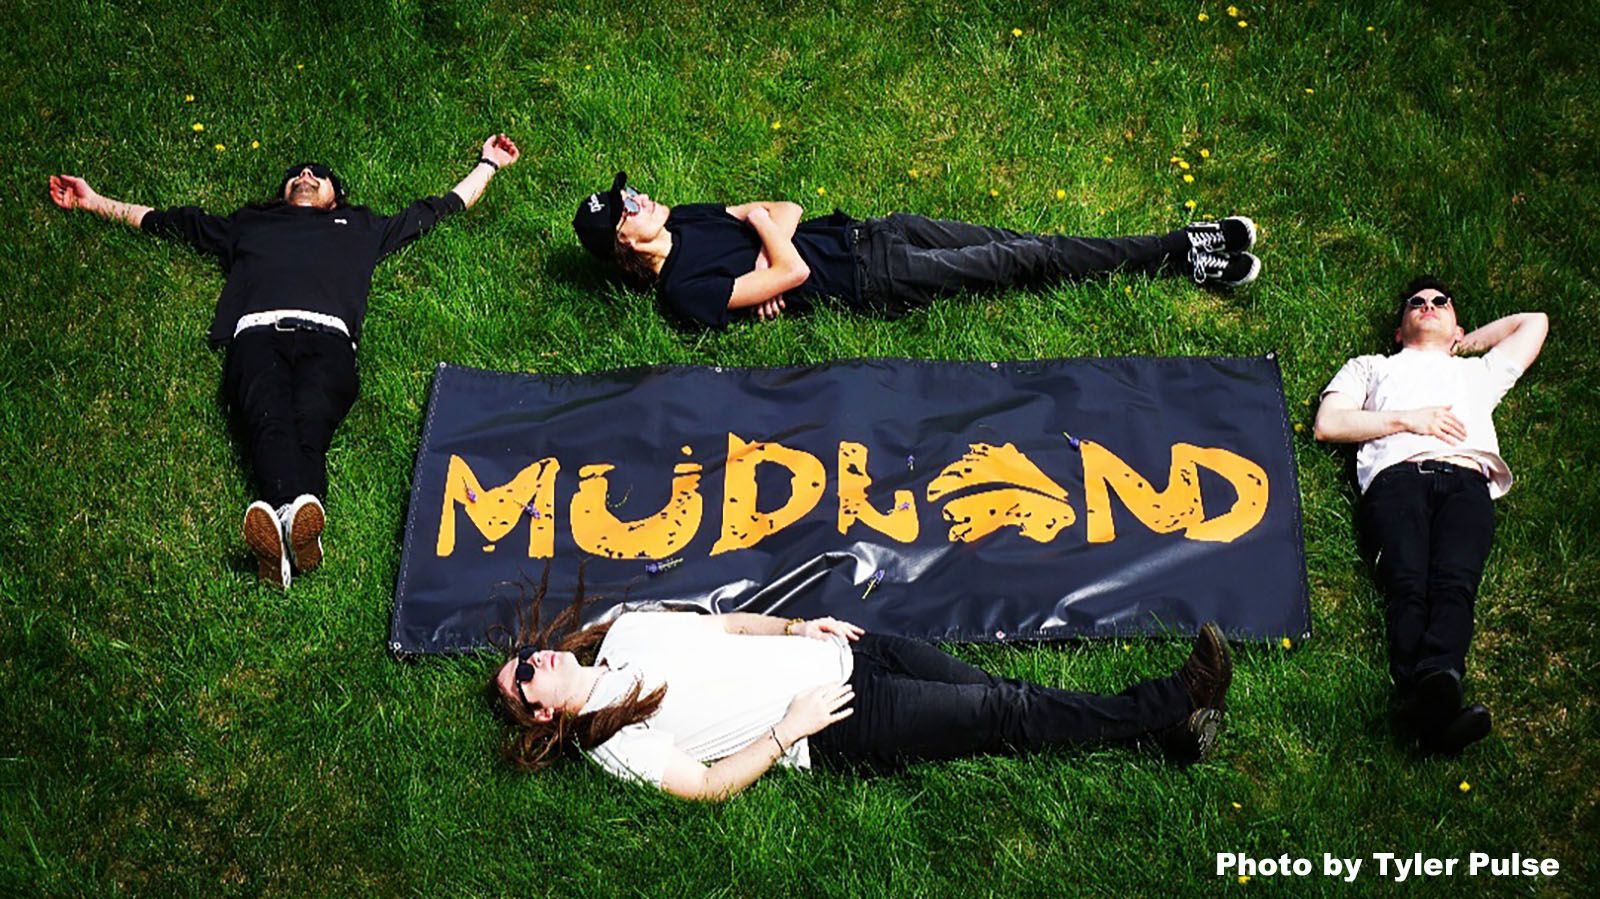 Local alternative band Mudland are being featured in the ALT Homegrown Spotlight.